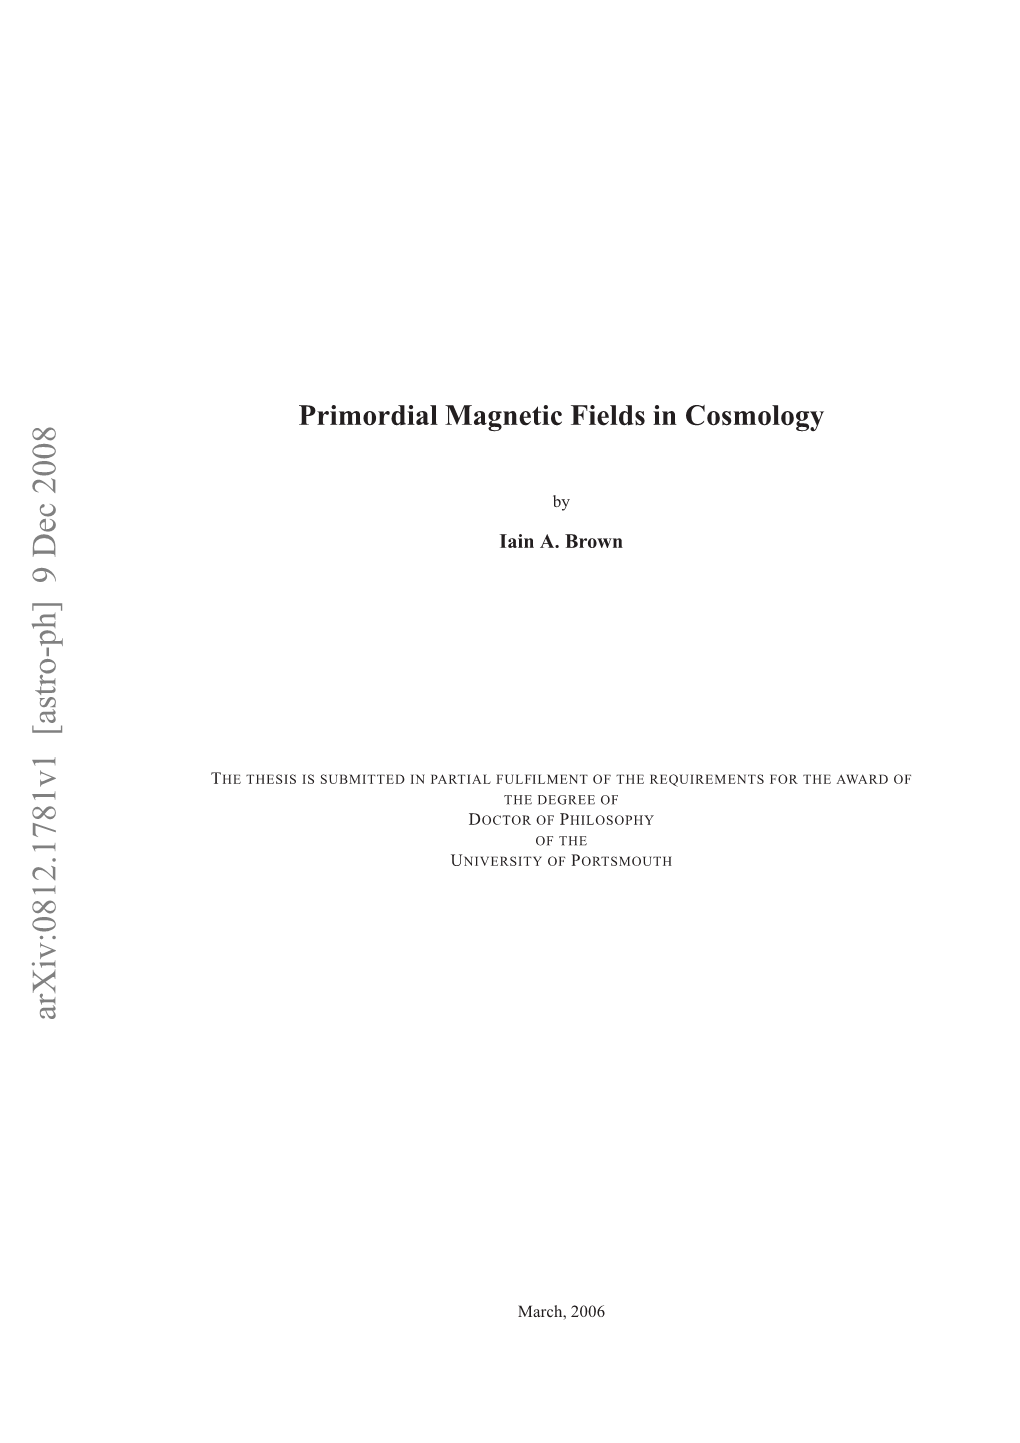 Primordial Magnetic Fields in Cosmology